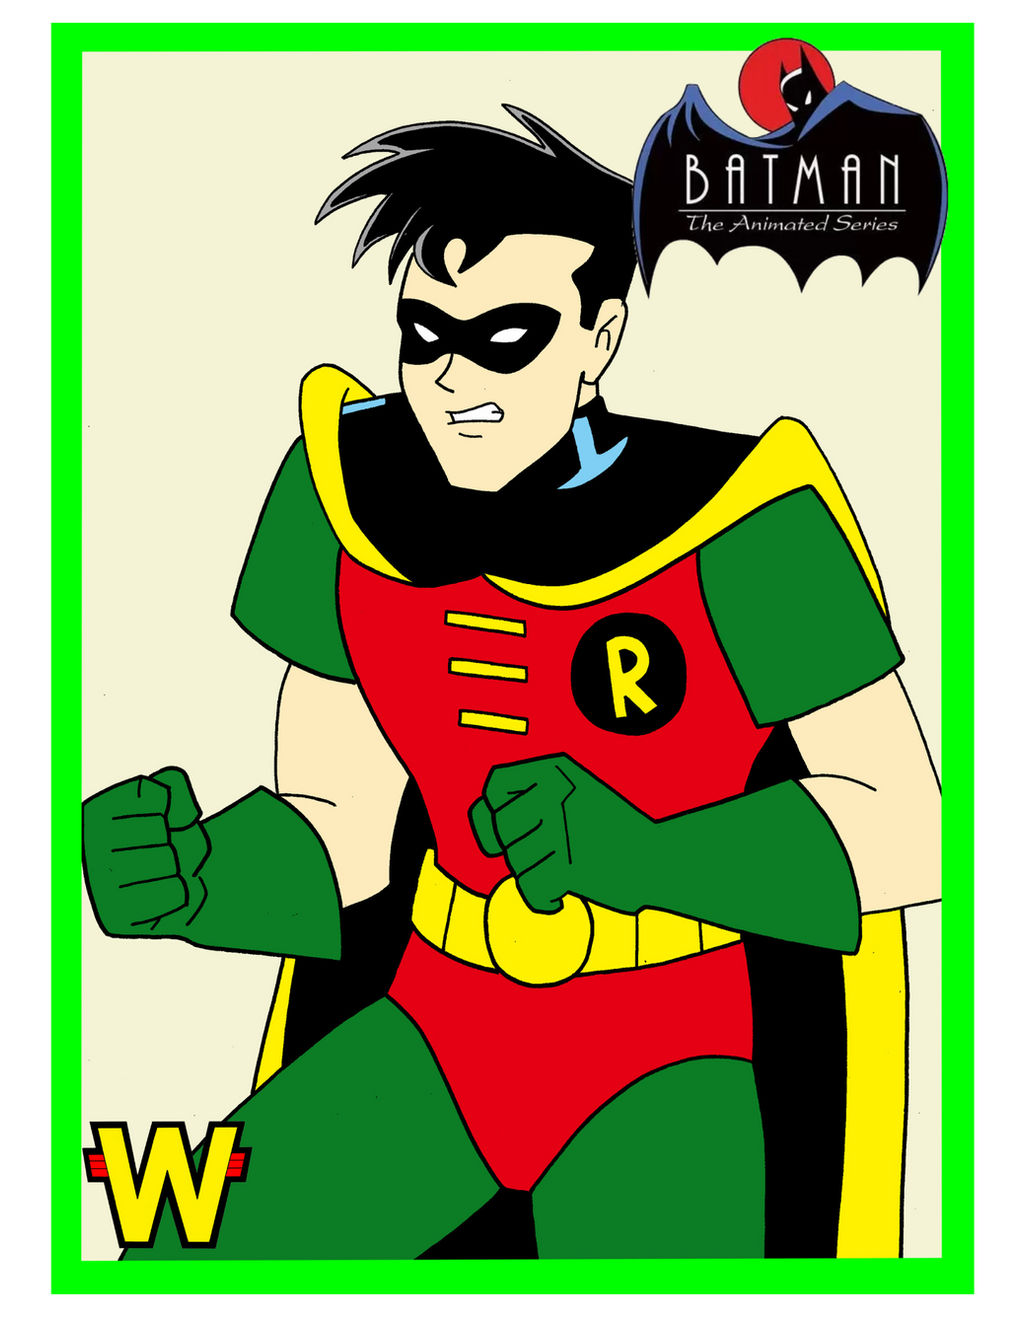 1992 Robin from Batman Animated Series by donandron on DeviantArt